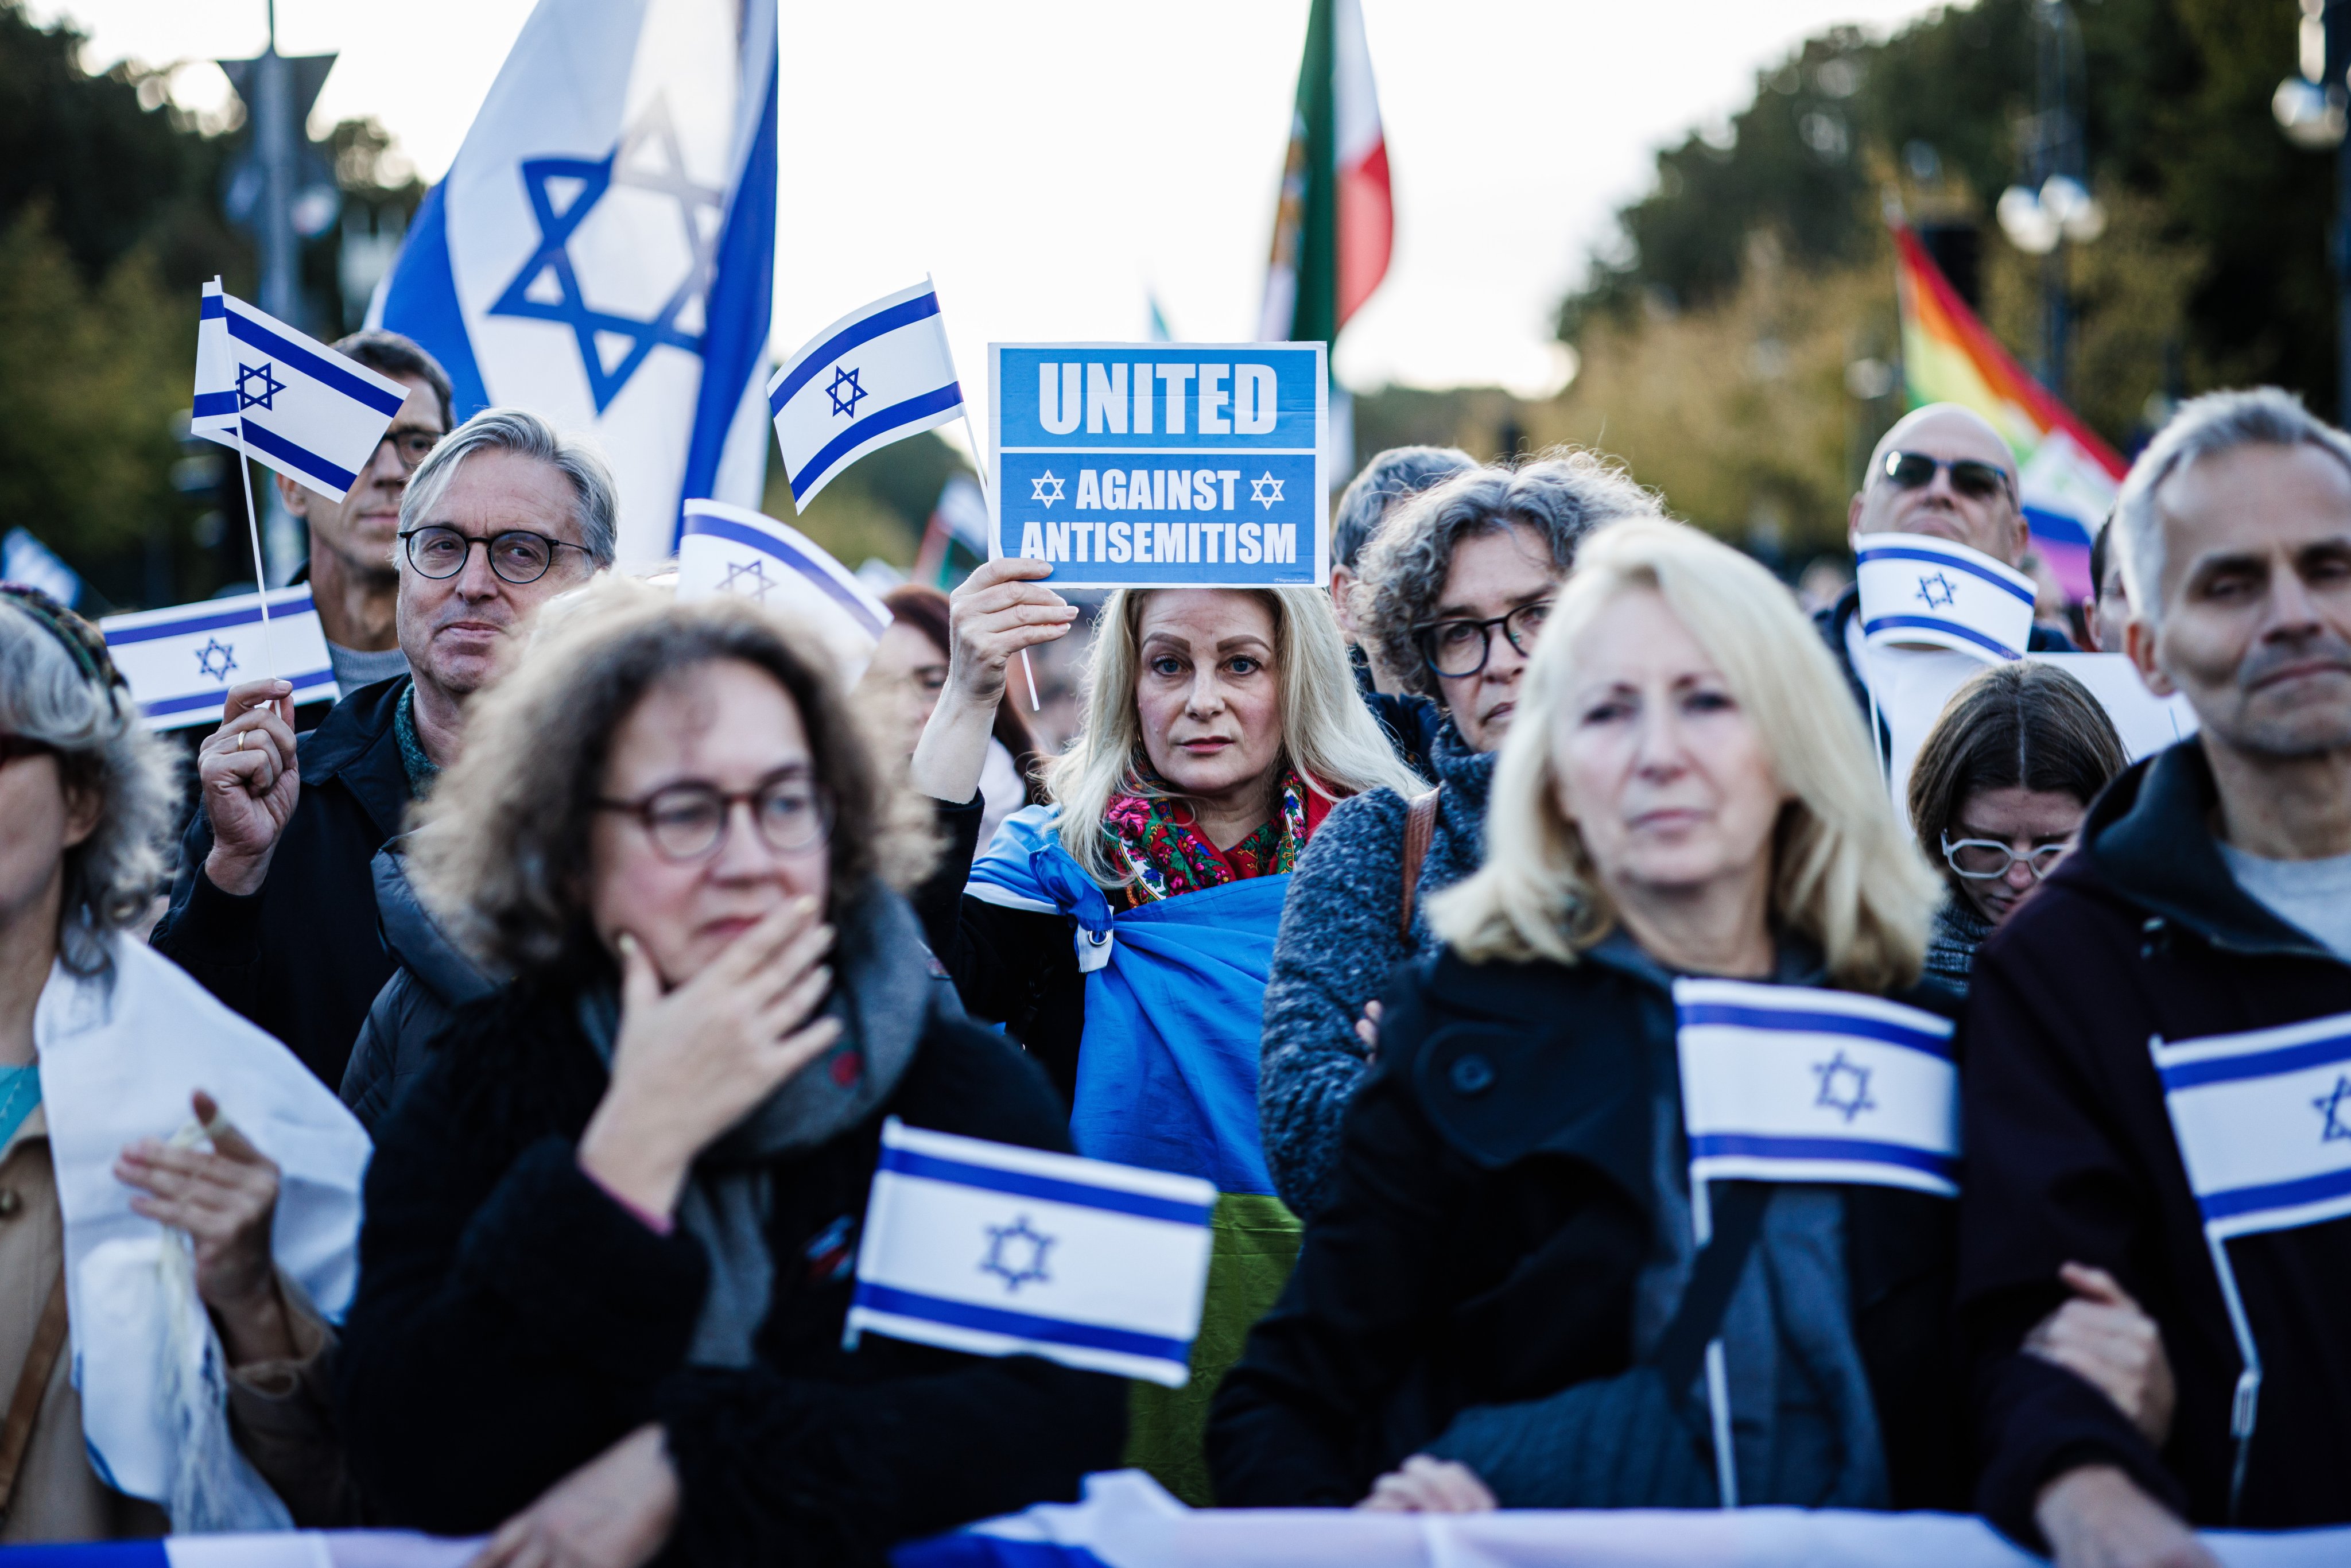 A demonstration against antisemitism in Berlin on October 22 as Germany faces its most virulent displays of anti-semitism since the second world war. Photo: EPA-EFE